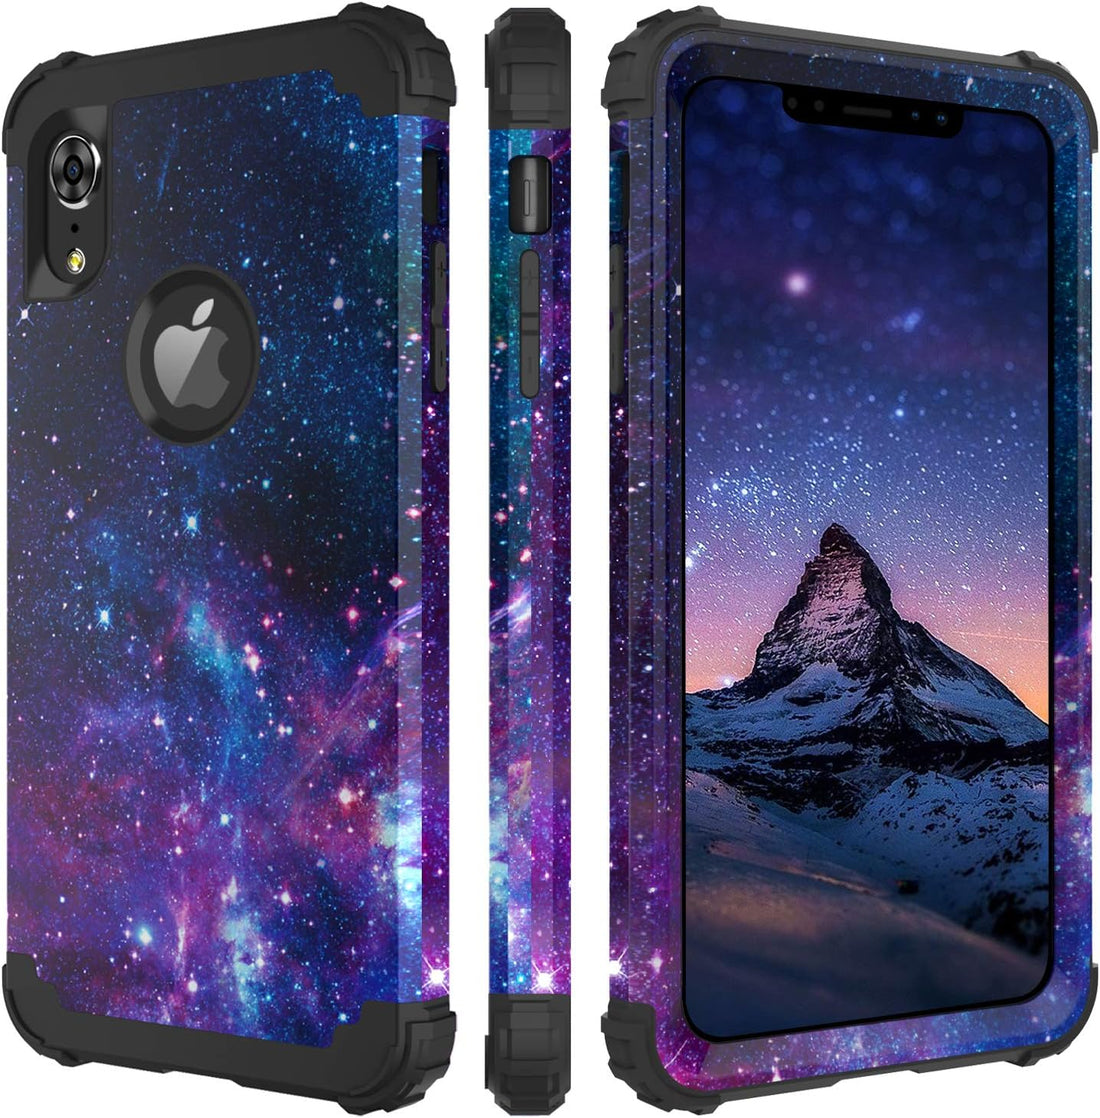 BENTOBEN iPhone XR Case, iPhone Xr Case Purple Space, 3 in 1 Heavy Duty Slim Nebula Galaxy Design Hybrid Hard PC Back Cover Soft Silicone Bumper Full Body Protective Phone Cases for iPhone XR, Space